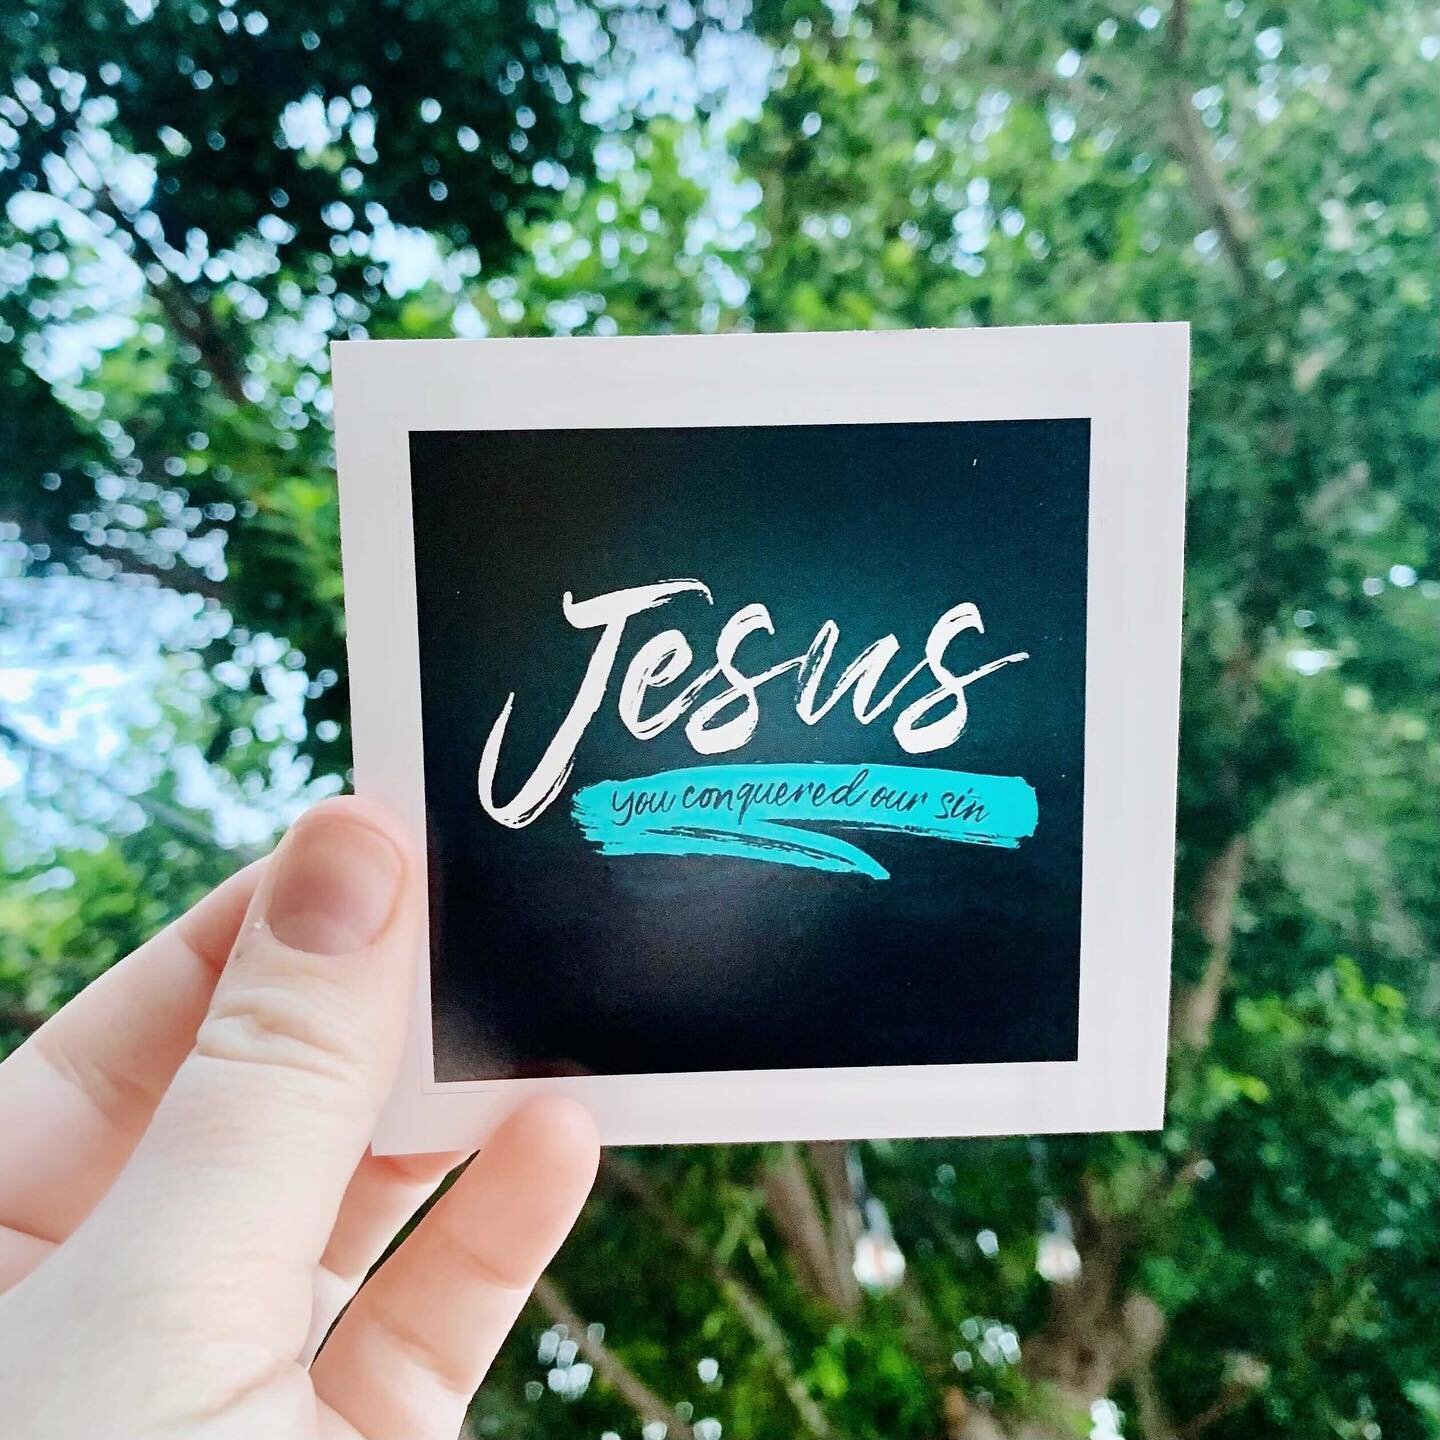 &ldquo;Jesus, You conquered our sin&rdquo;

🙌 The line from our track All to You is a reminder that Jesus gave us freedom from sin and we are called to respond by surrendering to Him

👉 Designed by Joel Cook. Follow him at @thejoelcook!!

💥 Snag y